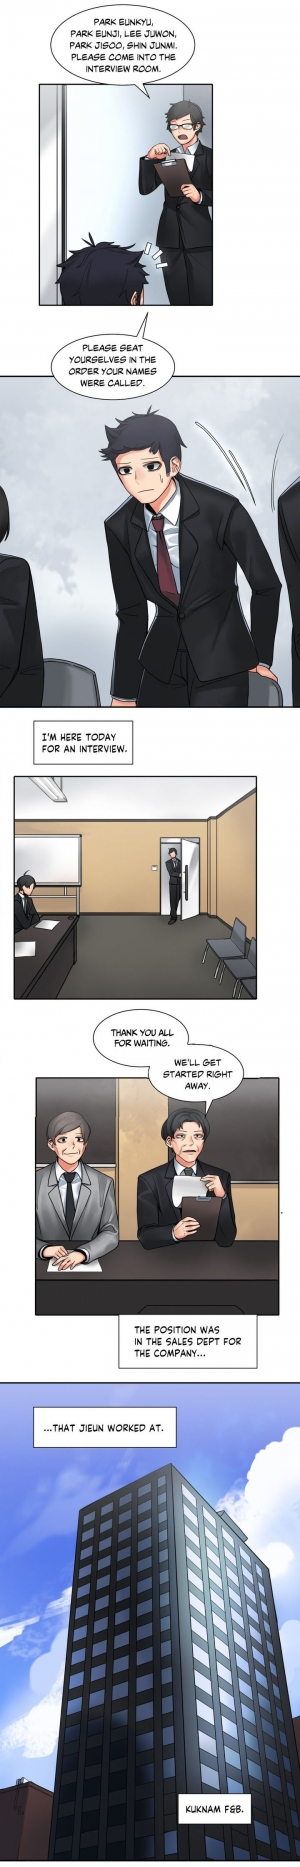 [Gaehoju, Gunnermul] The Girl That Got Stuck in the Wall Ch.11/11 [COMPLETED] [English] [Hentai Universe] - Page 67